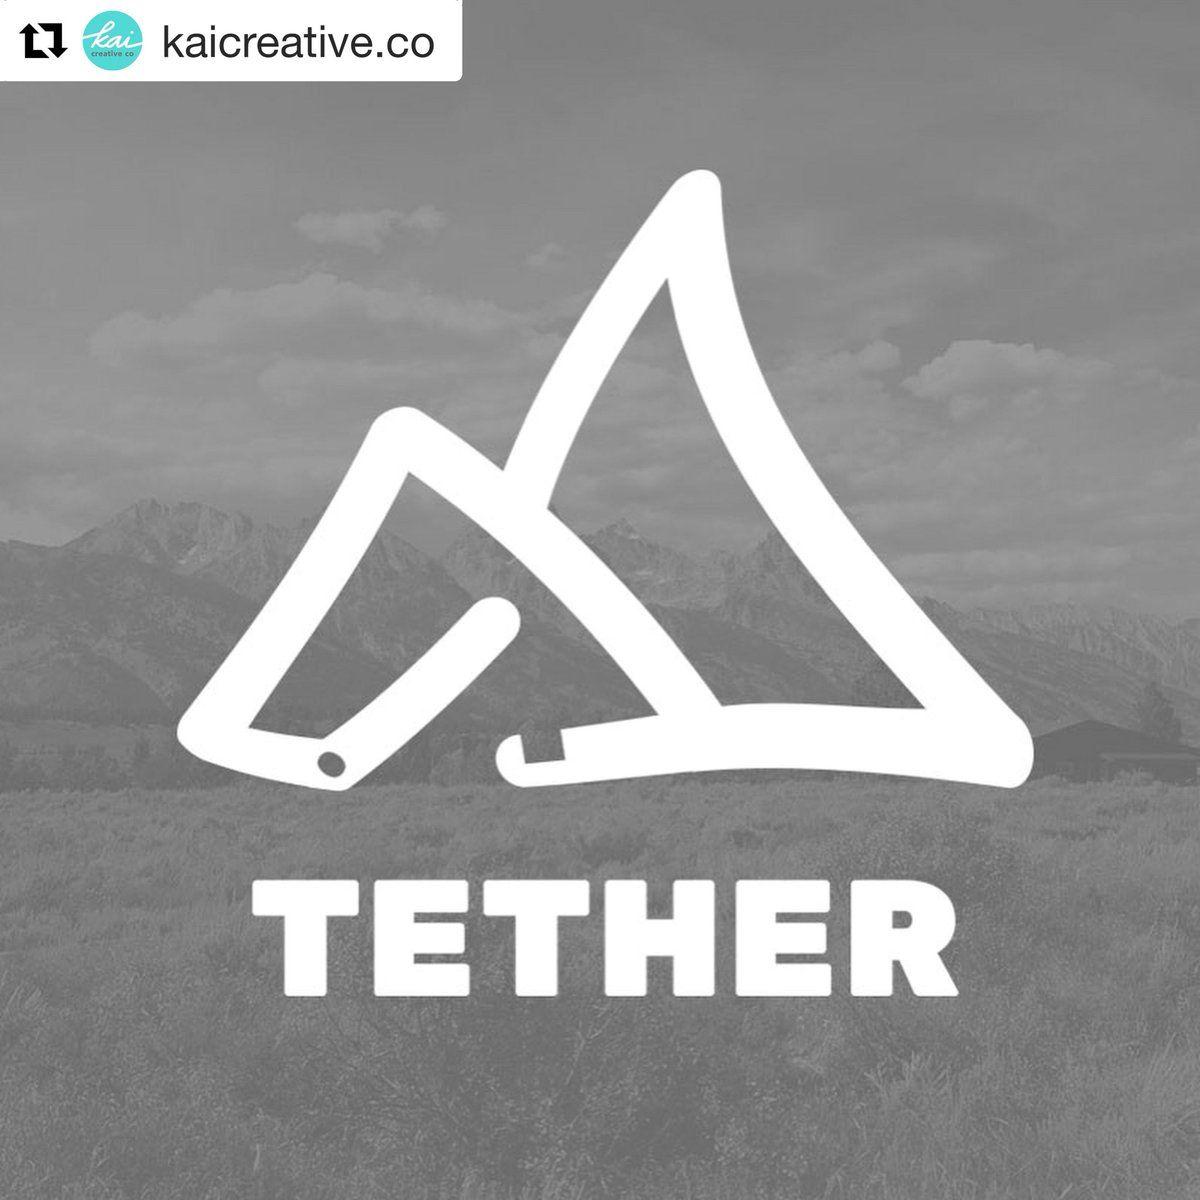 Tether Logo - Tether - “The logo design process can be long